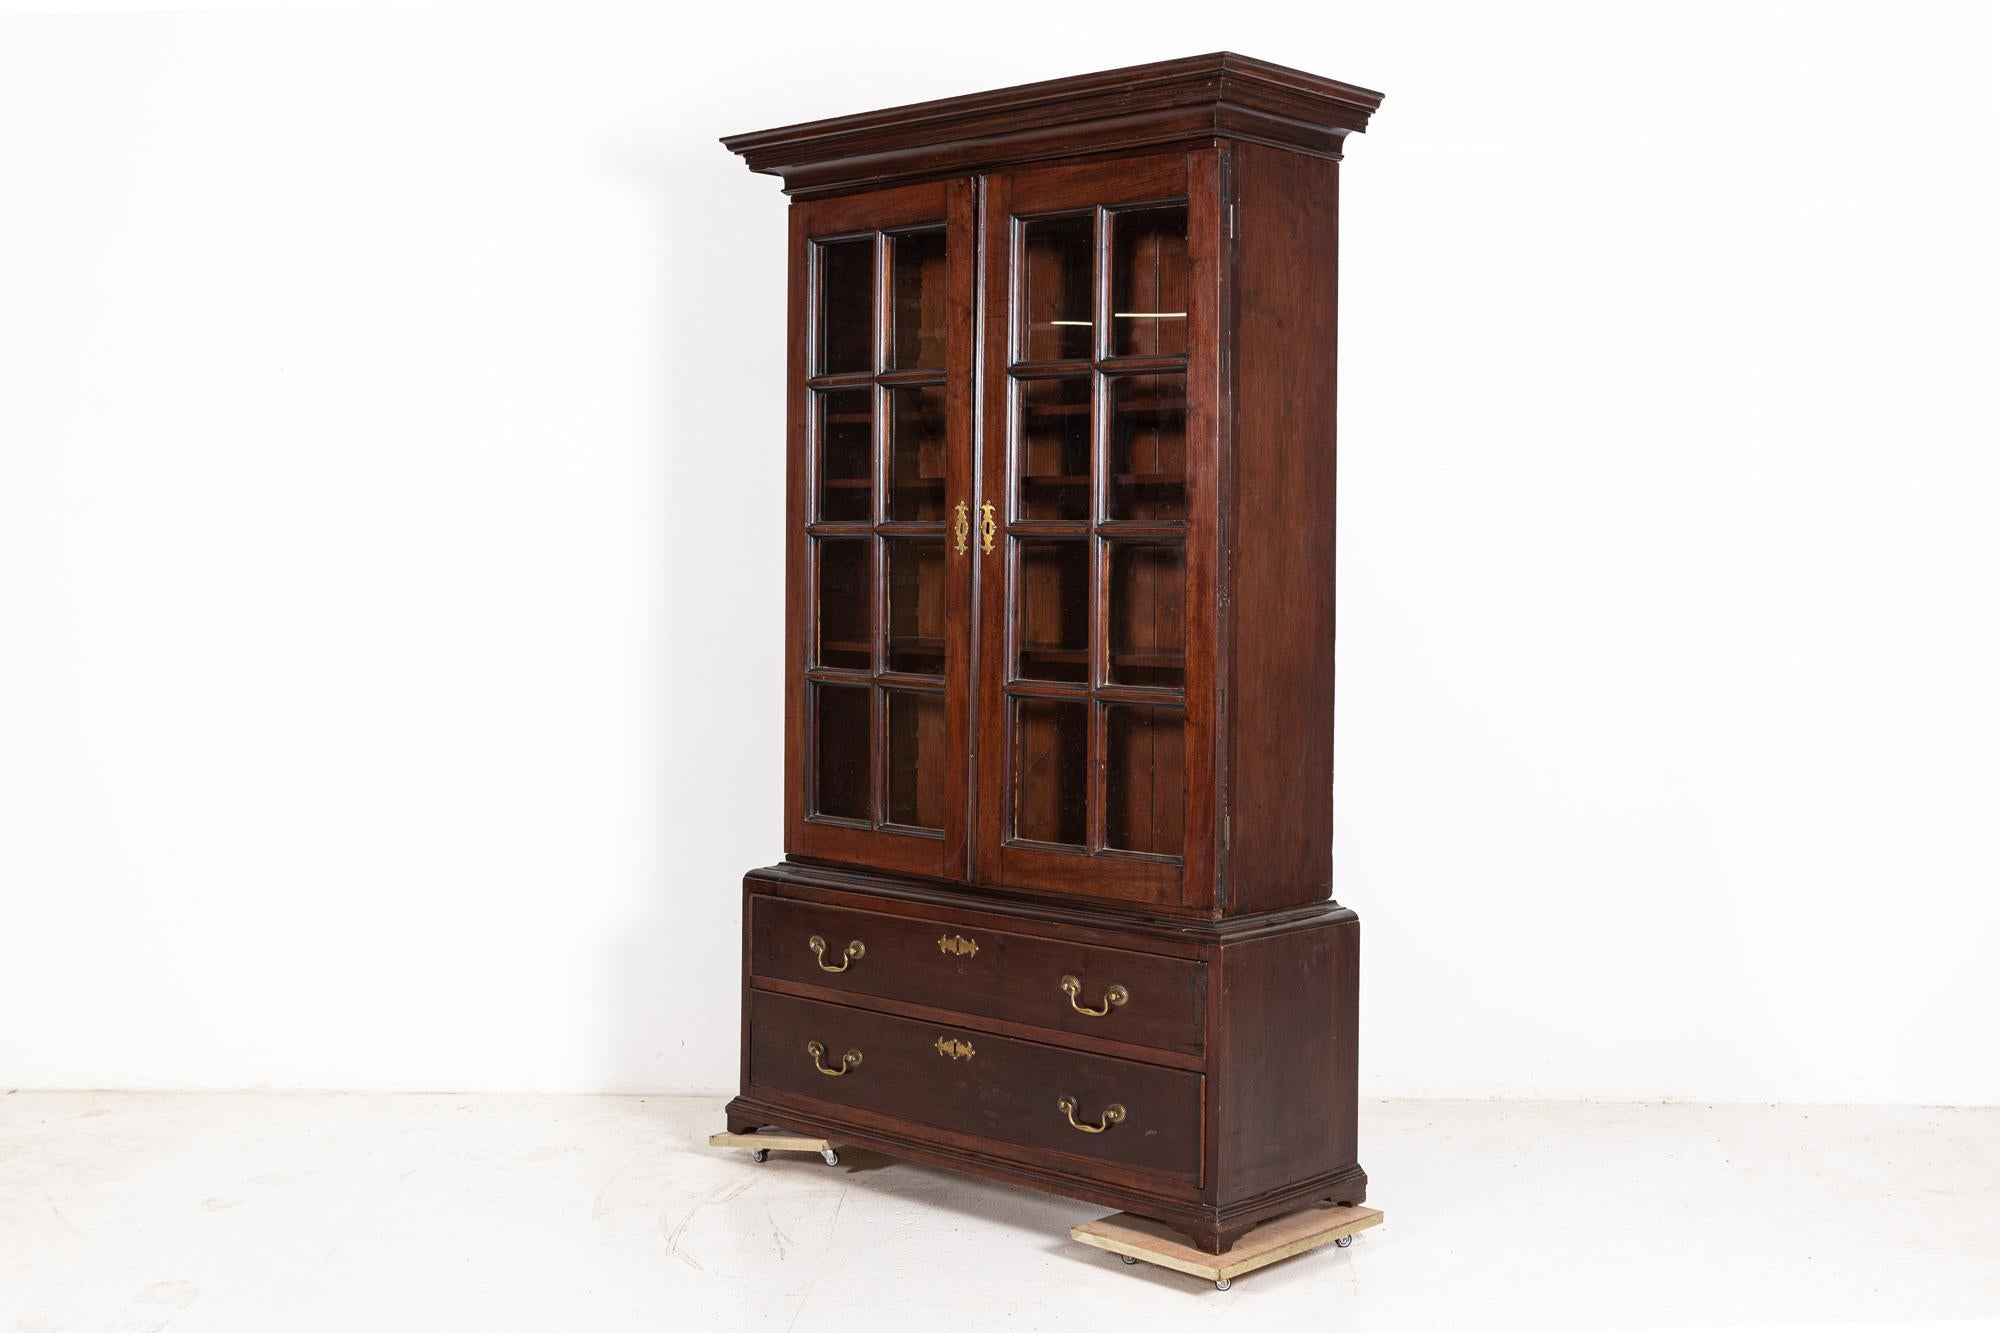 Circa 1820-30’s

Early 19thC English mahogany school library glazed bookcase

Excellent quality and patination with original hardware

Adjustable shelves

(3 parts)

One glazed panel has been signed by a pupil.

   

Measures: W115 x